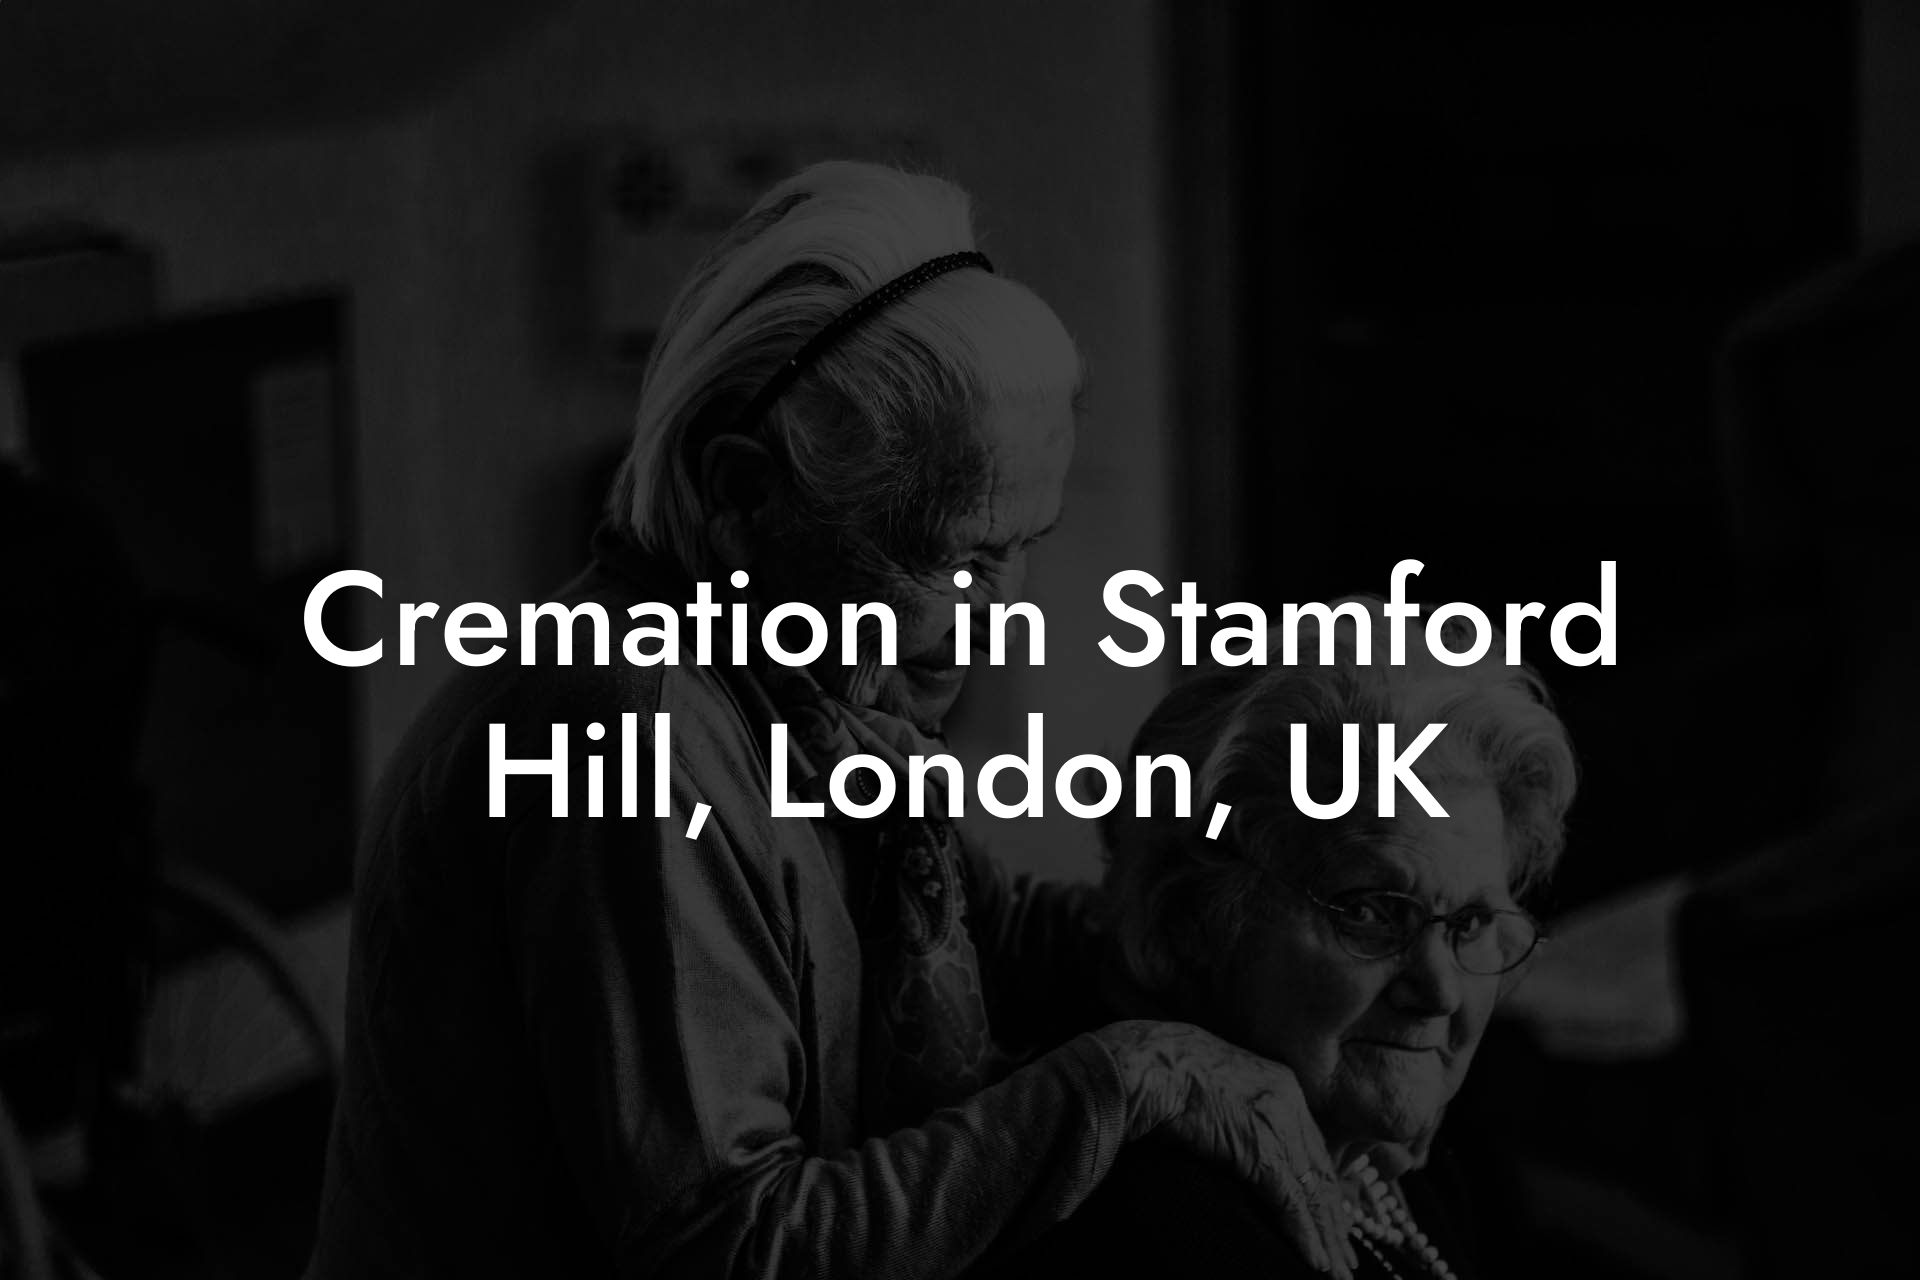 Cremation in Stamford Hill, London, UK